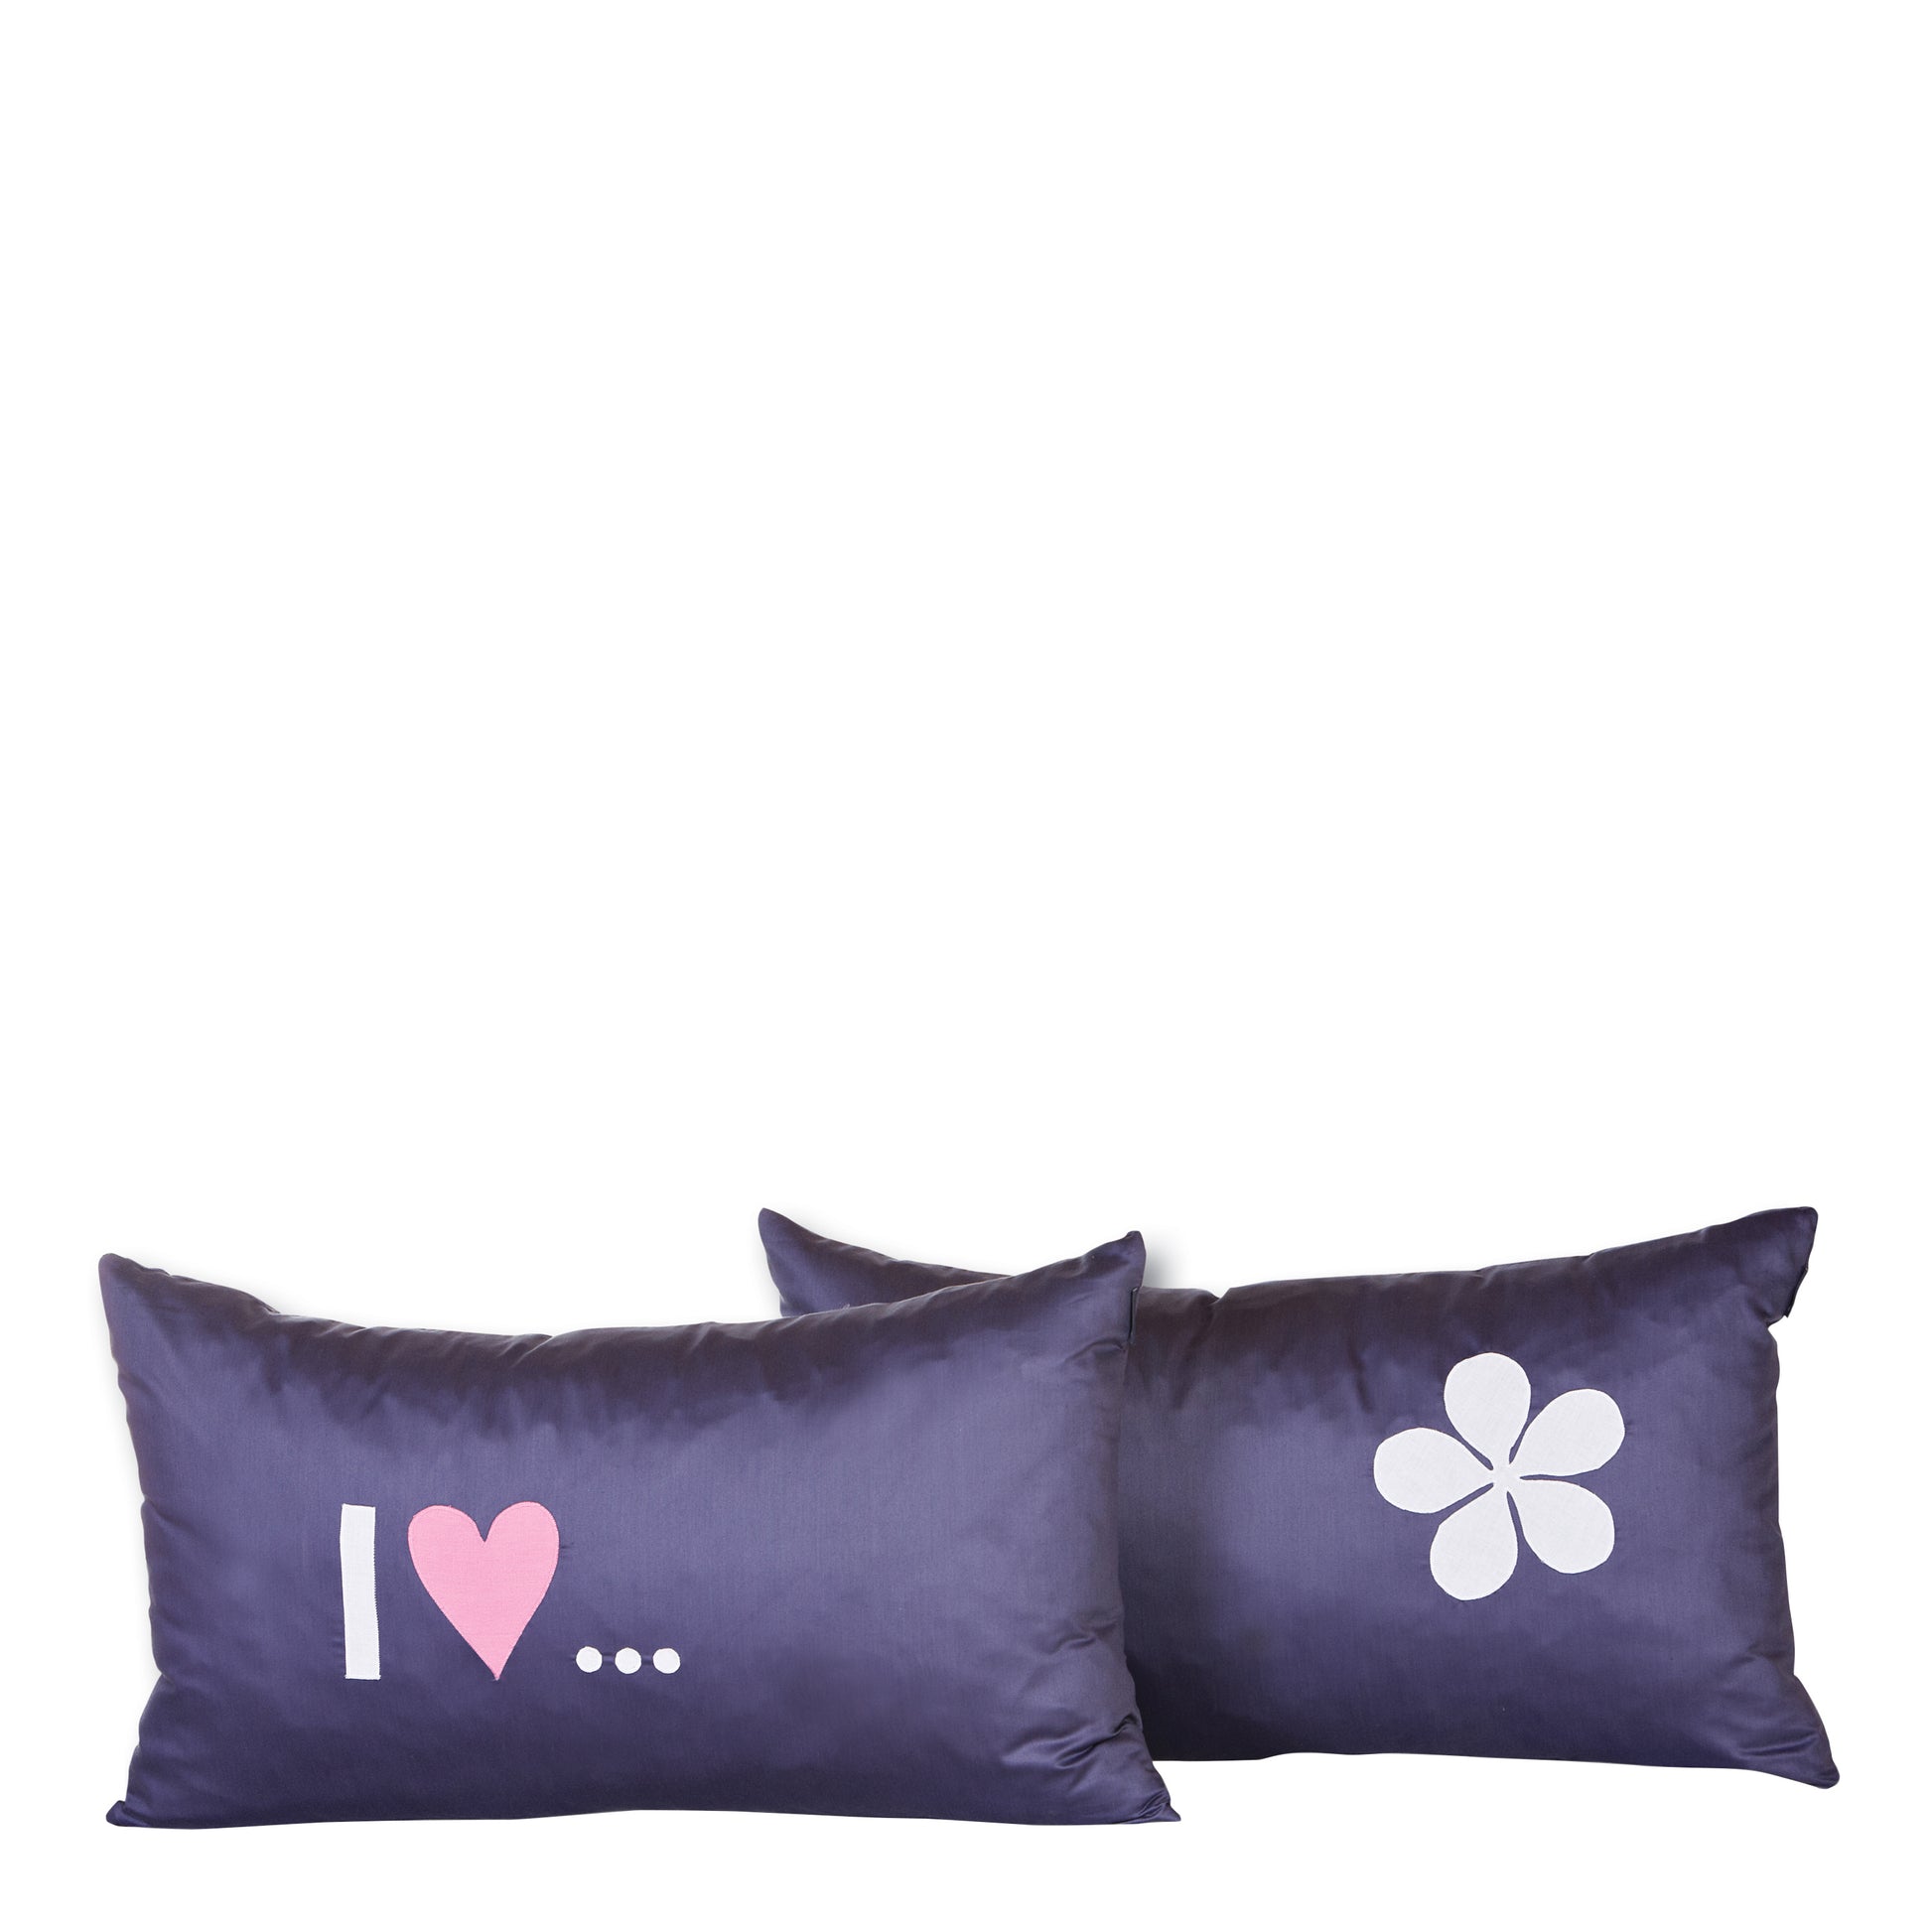 Manis-h  Set of 2 Cushion Covers in a Heart & Flower Design